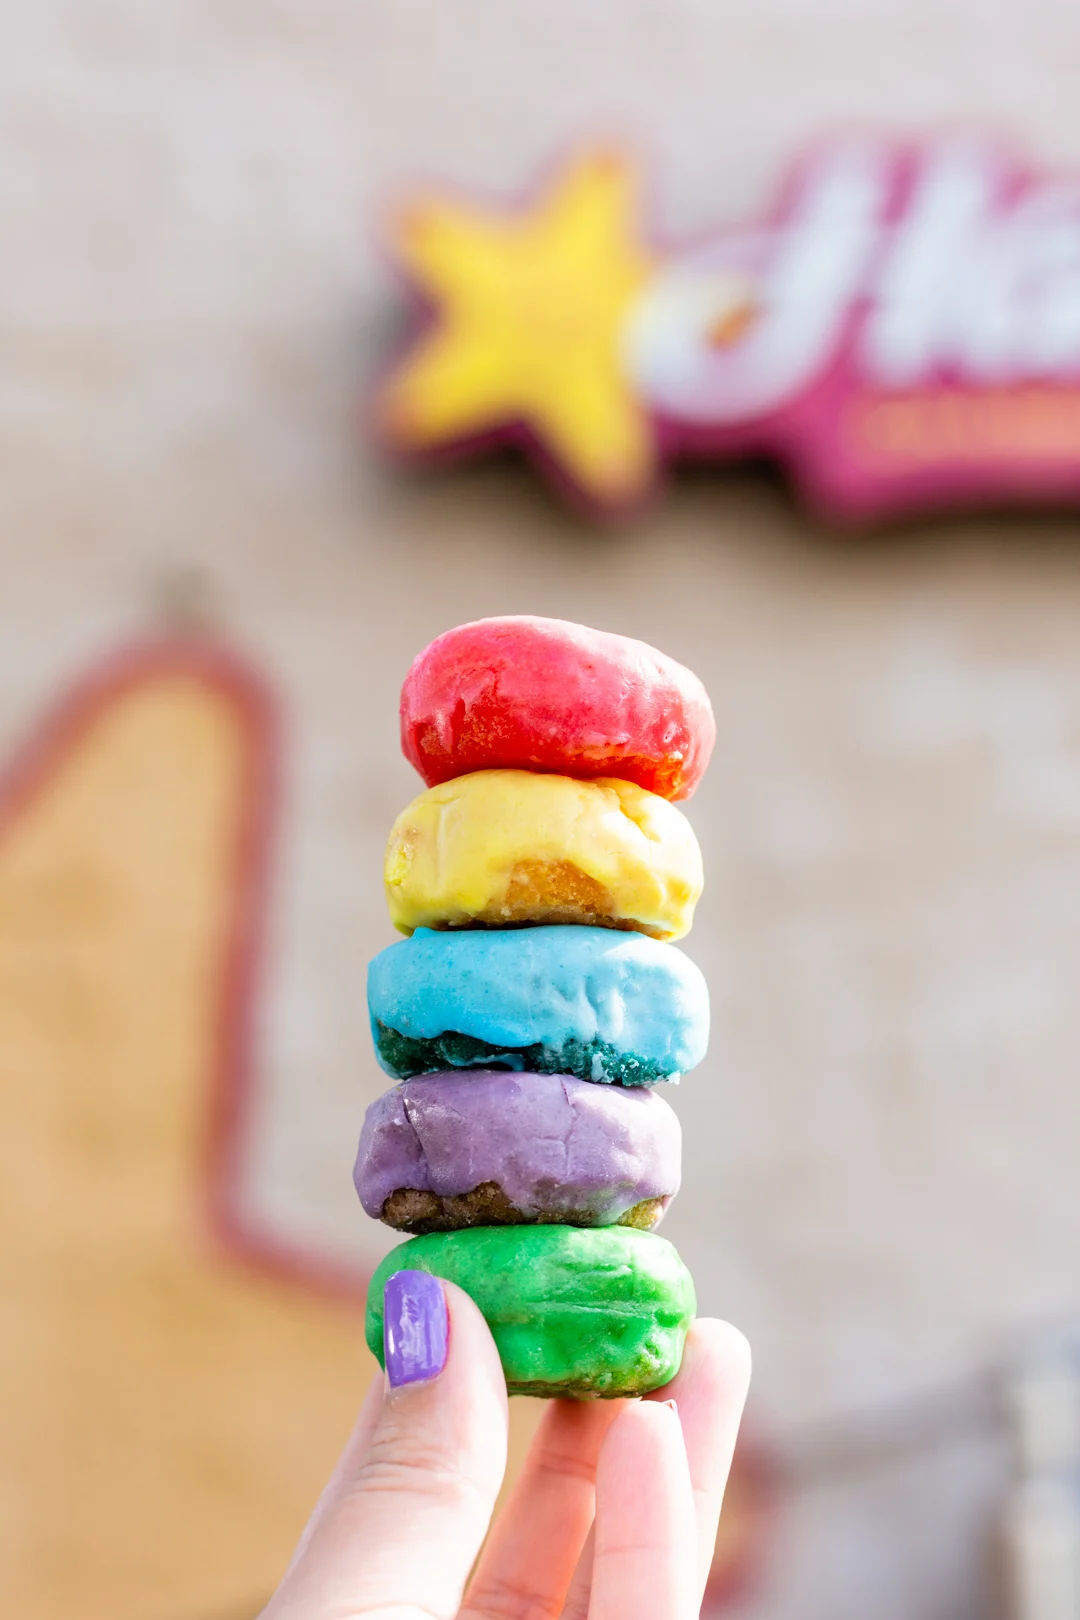 Froot Loop donuts exist and you need to get them at Hardees now before they are gone.